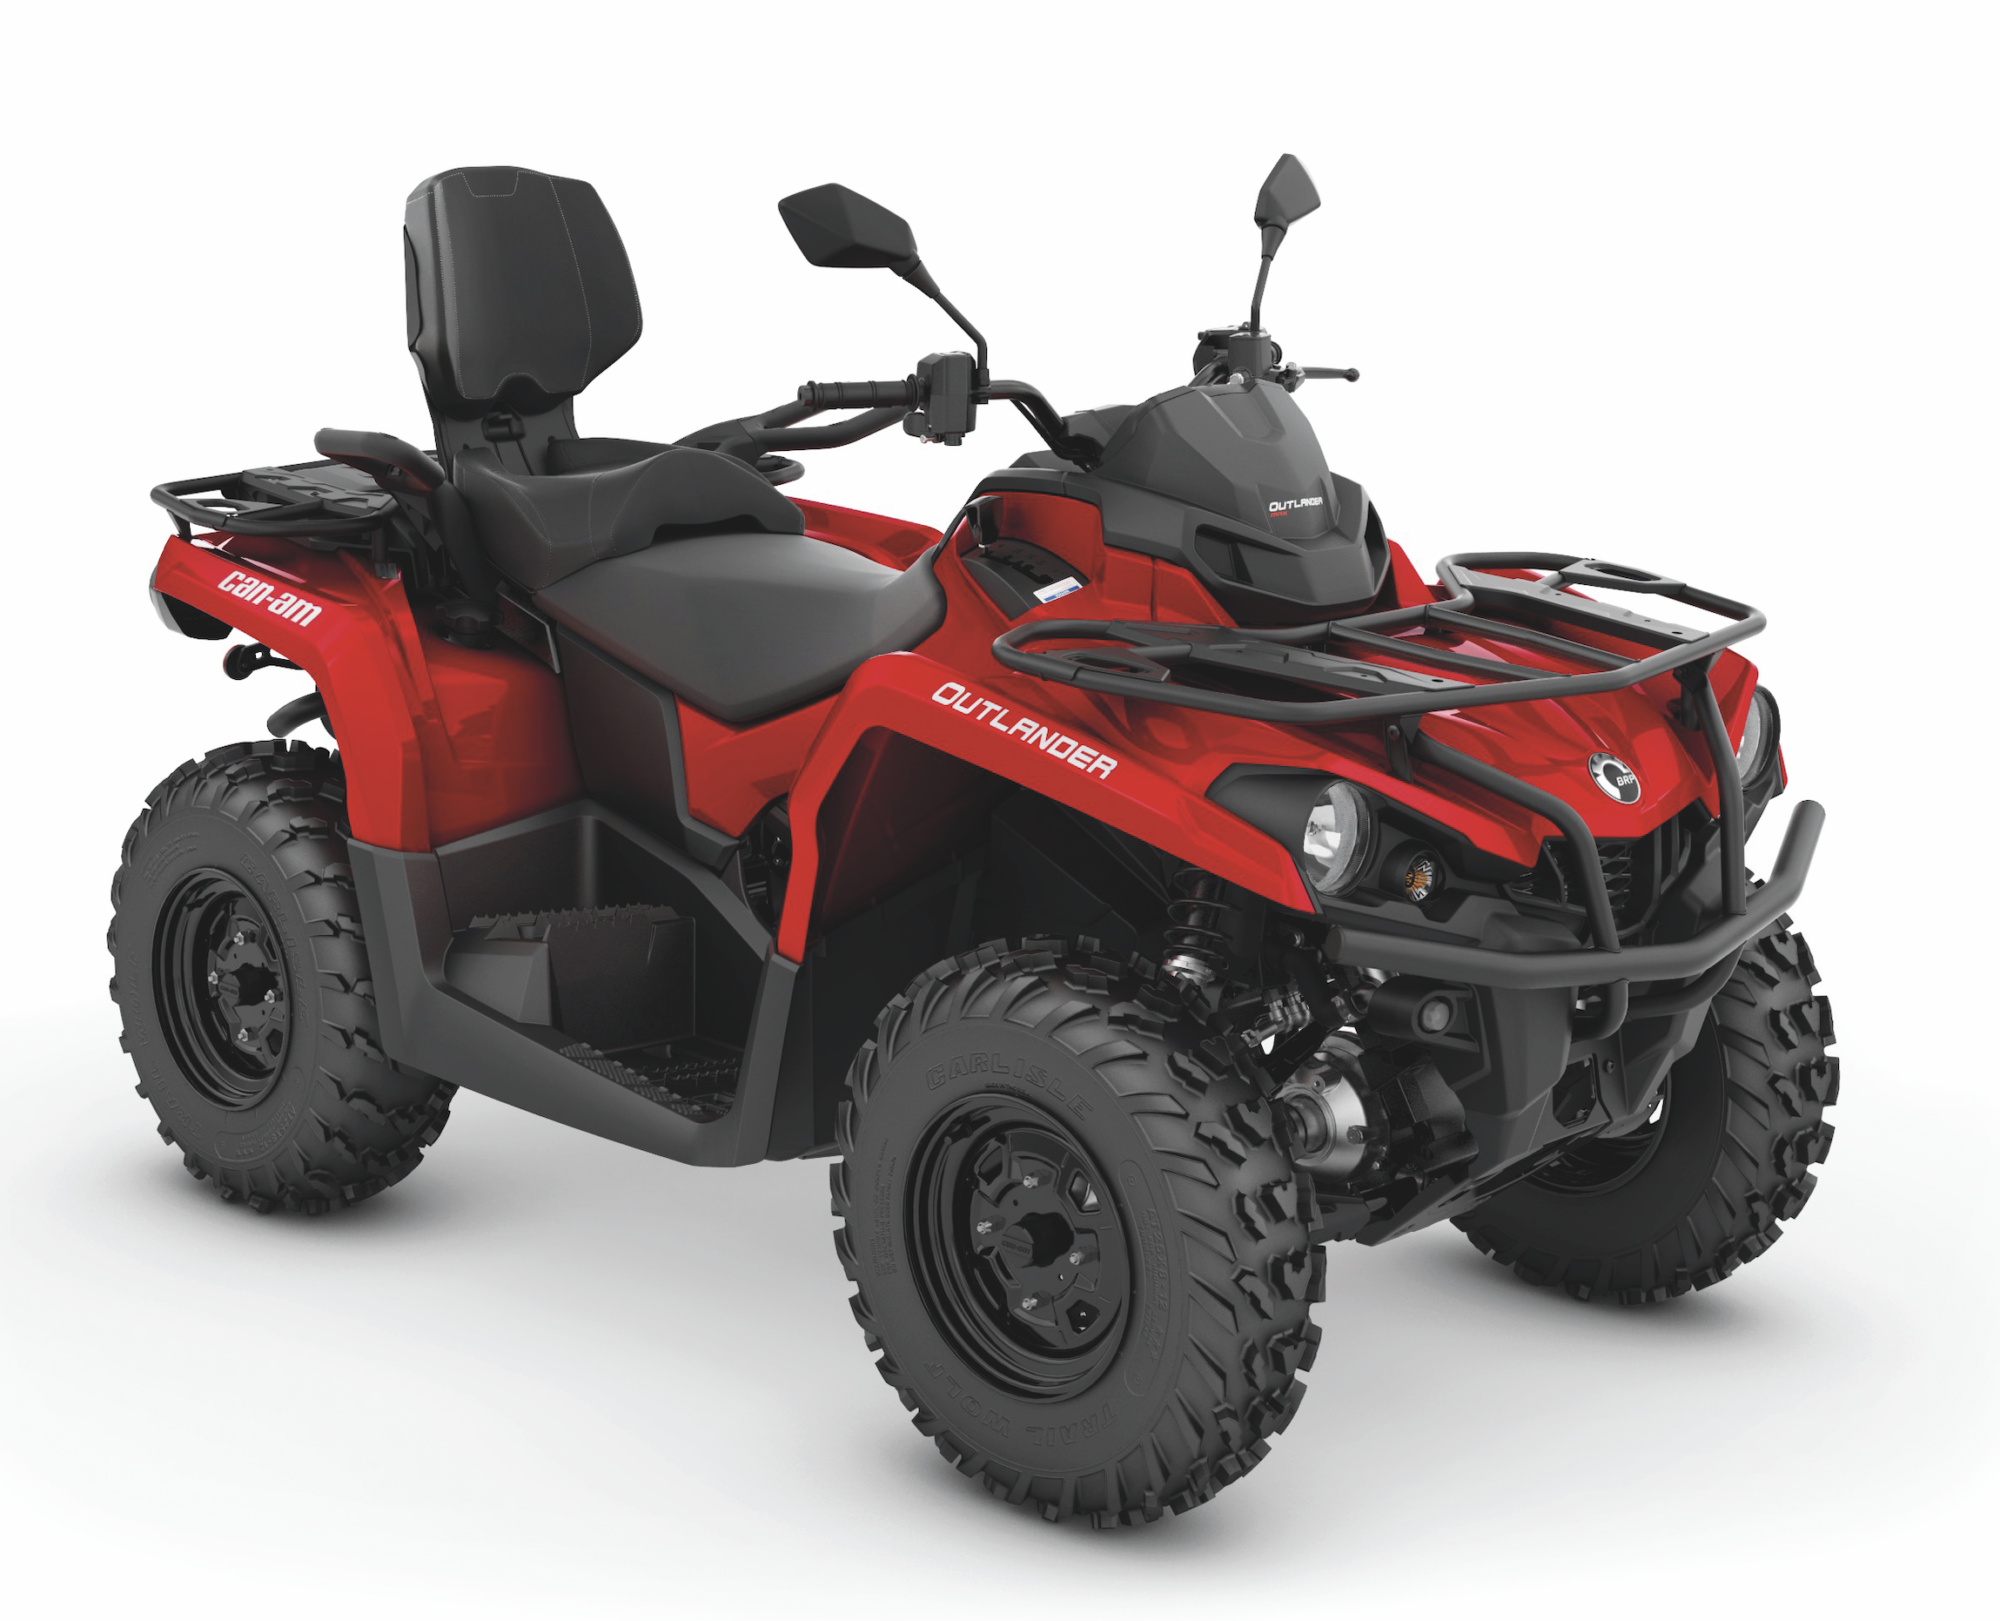 2022 line-up of ATV and side-by-side vehicles unveiled